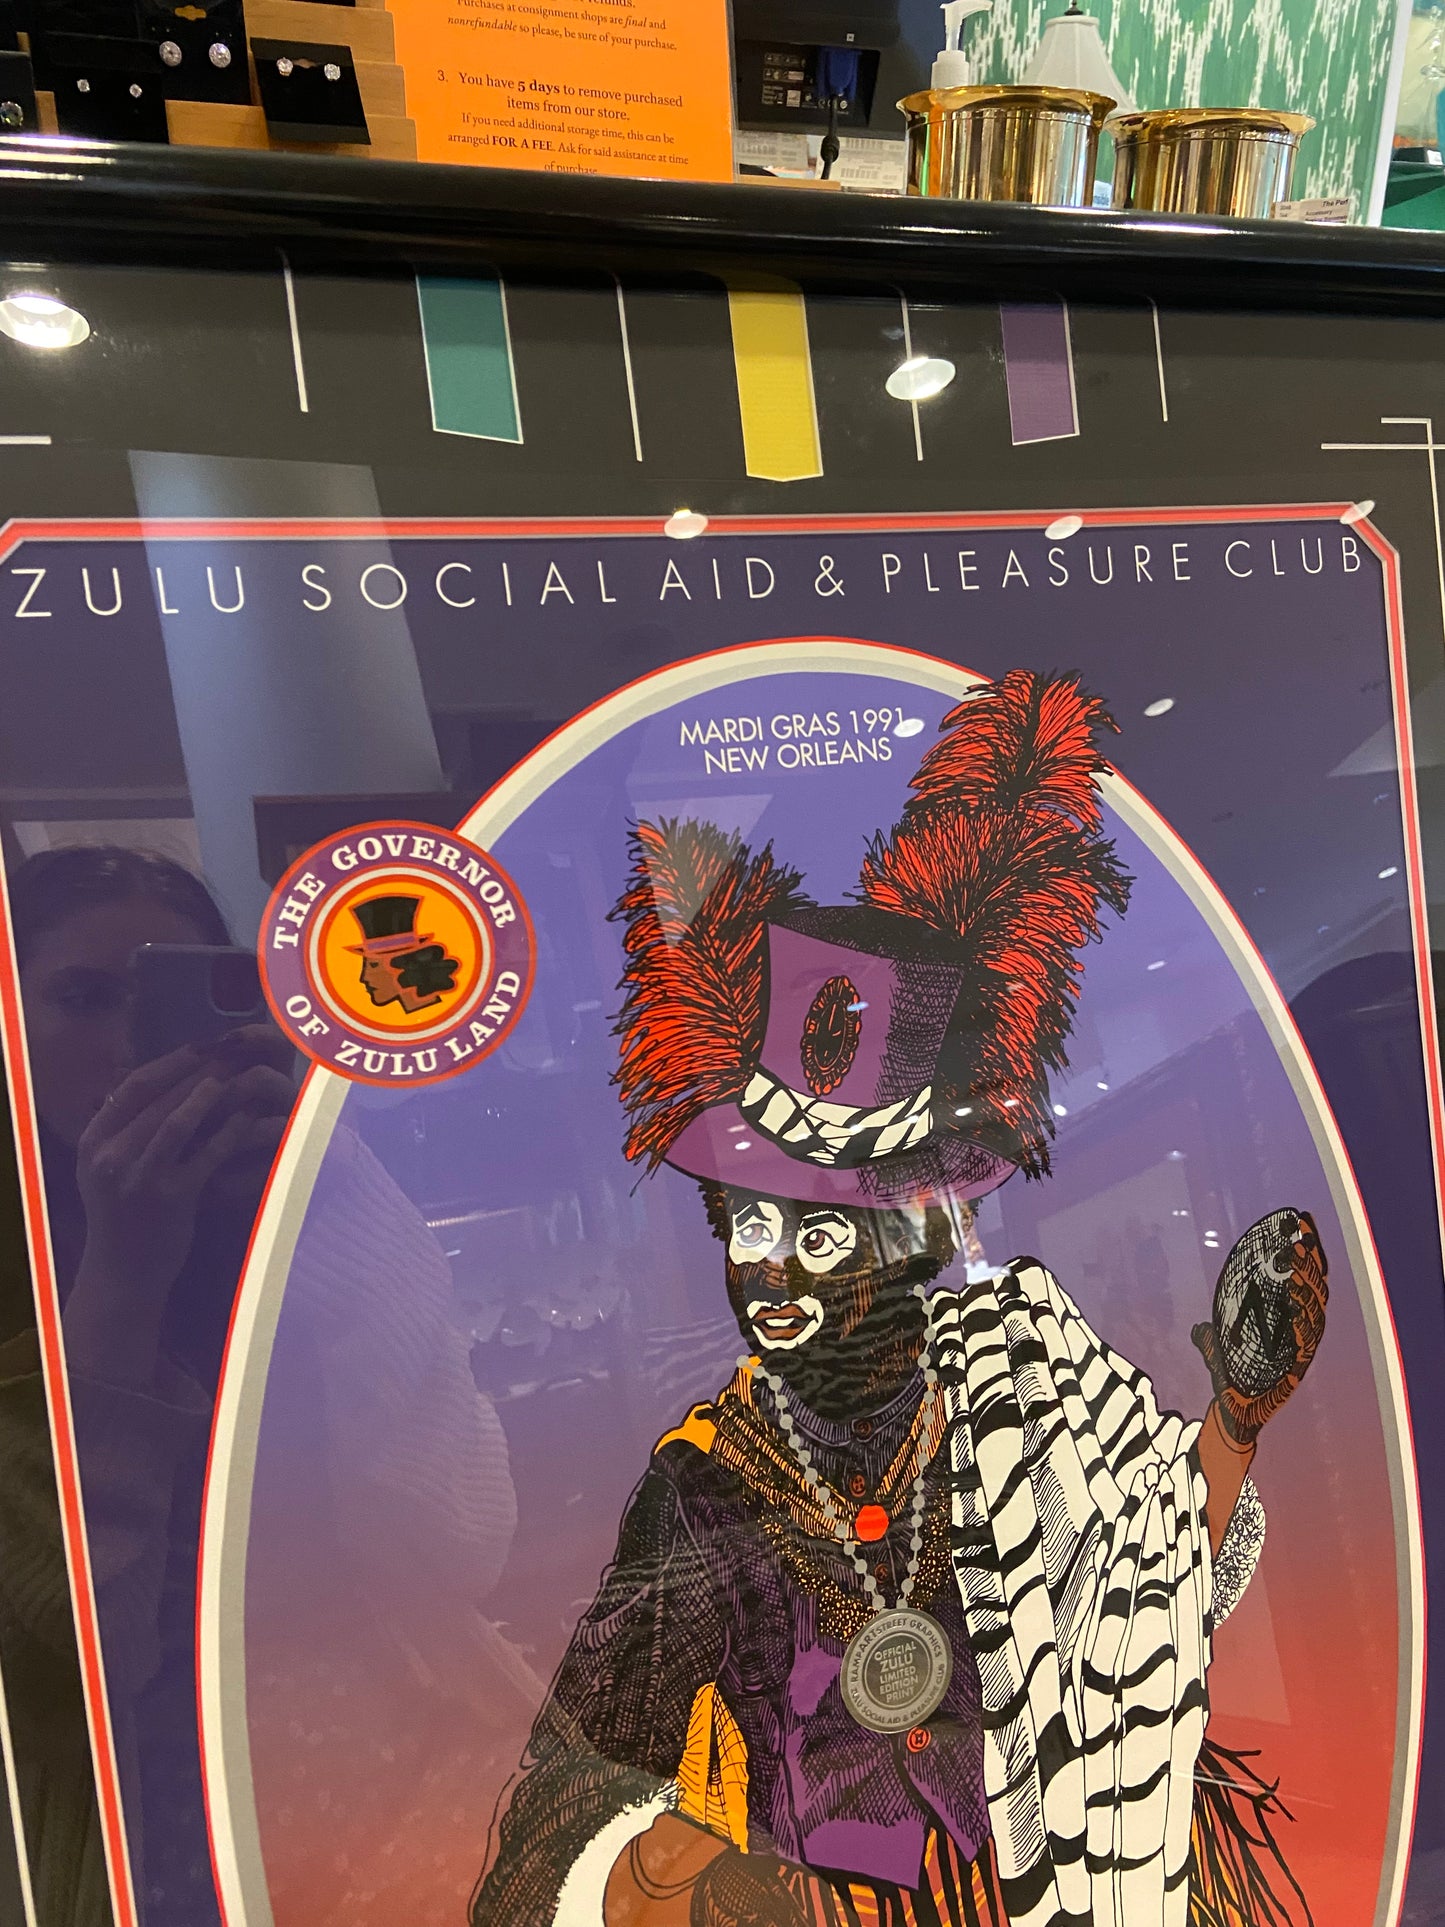 Zulu Social and Pleasure Club Limited Edition Poster "The Governor"